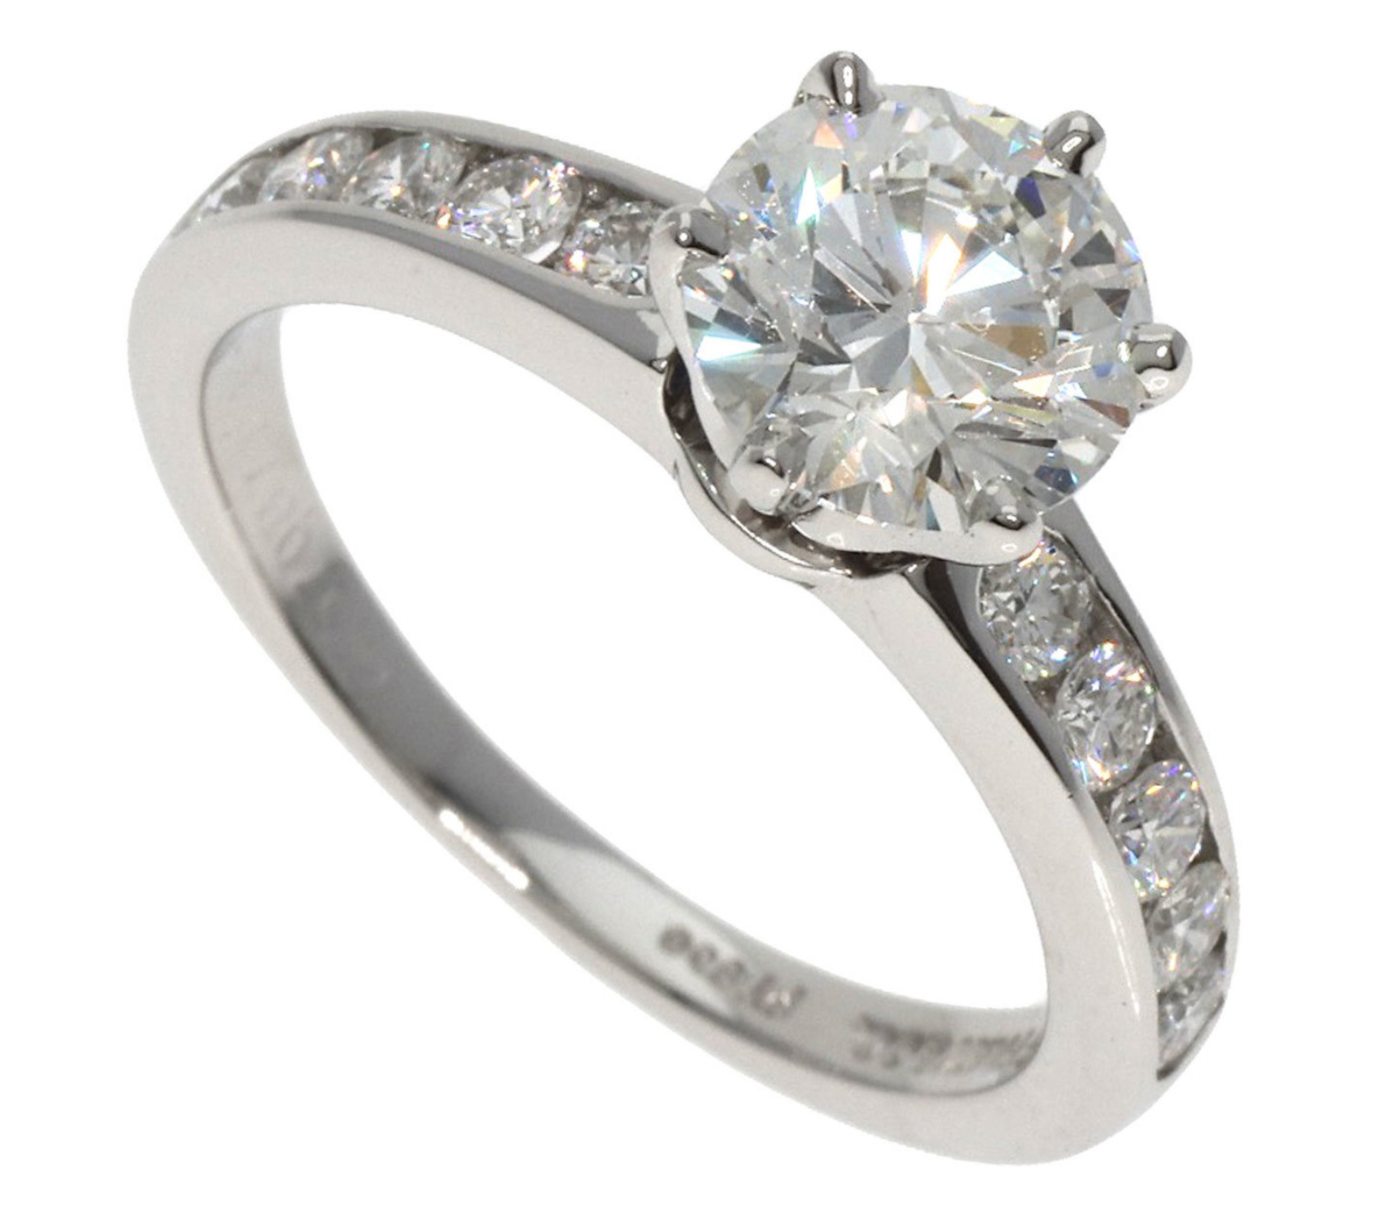 Pre-owned Platinum Tiffany Setting Engagement Ring set with a 1.27ct center diamond